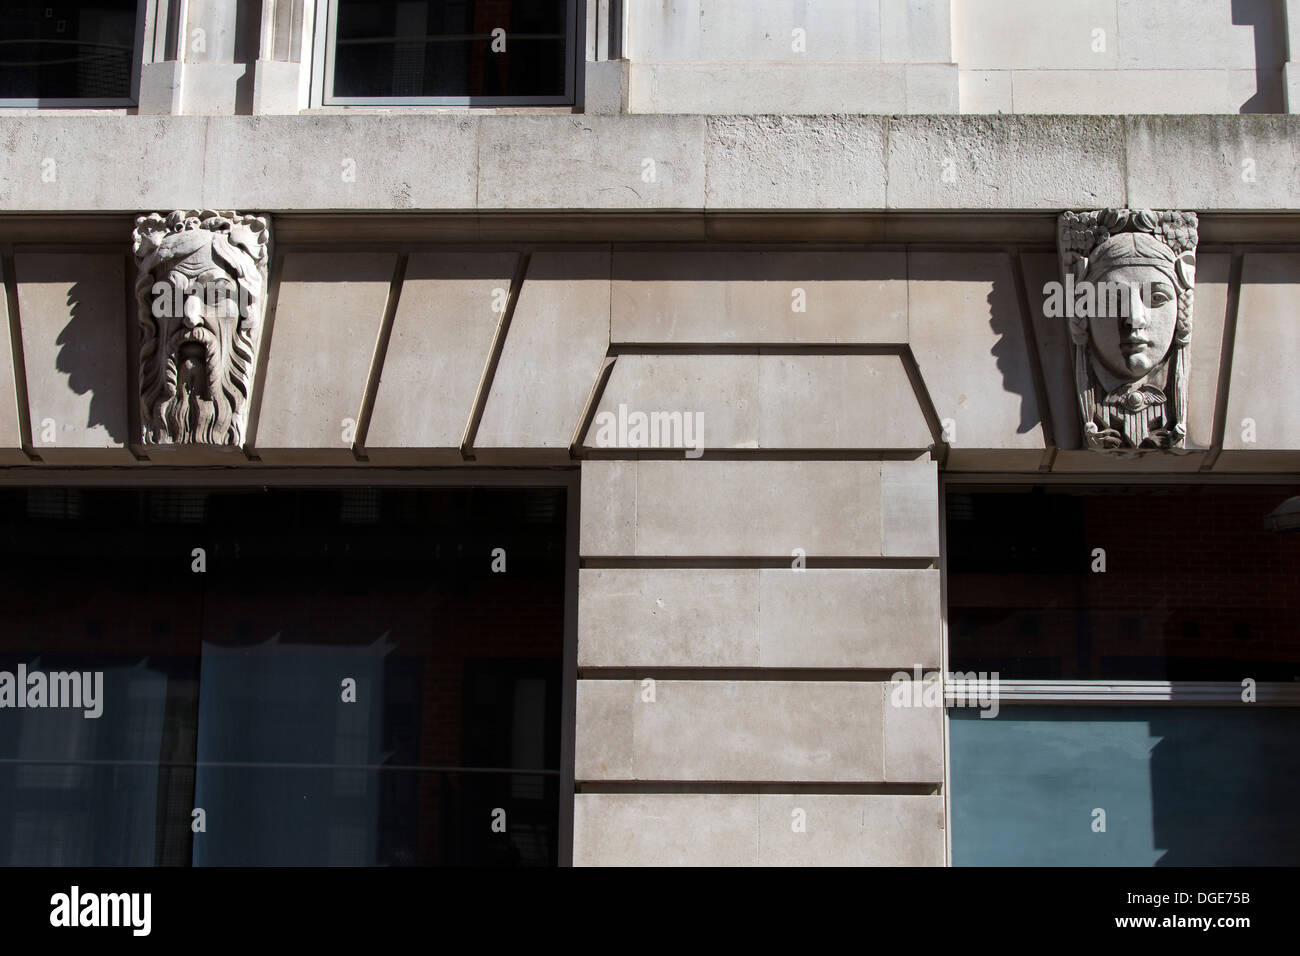 Carvings on the facade of Dorset House a 1930's office block, Stamford Street, London, England, UK. Stock Photo